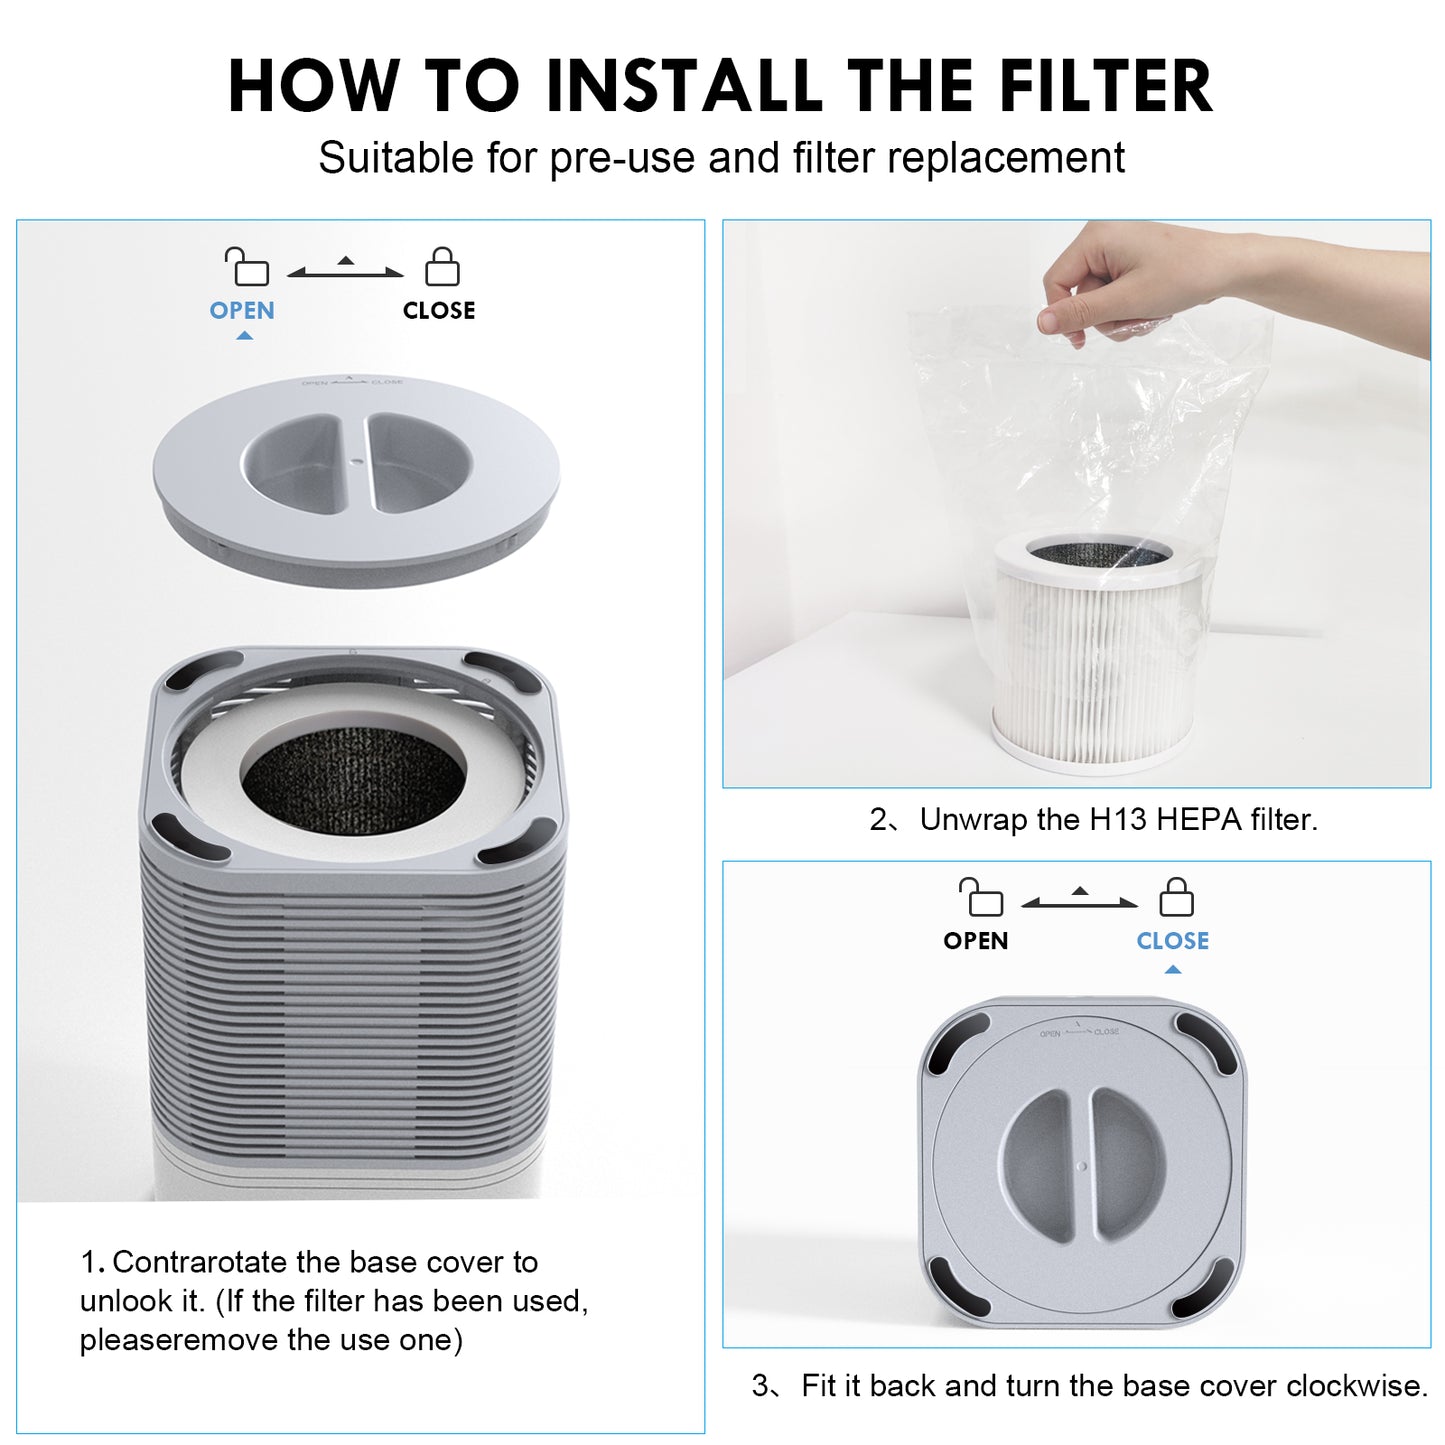 Air Purifier A1 Replacement Filter, VEWIOR H13 True HEPA Air Cleaner Filter Vewior